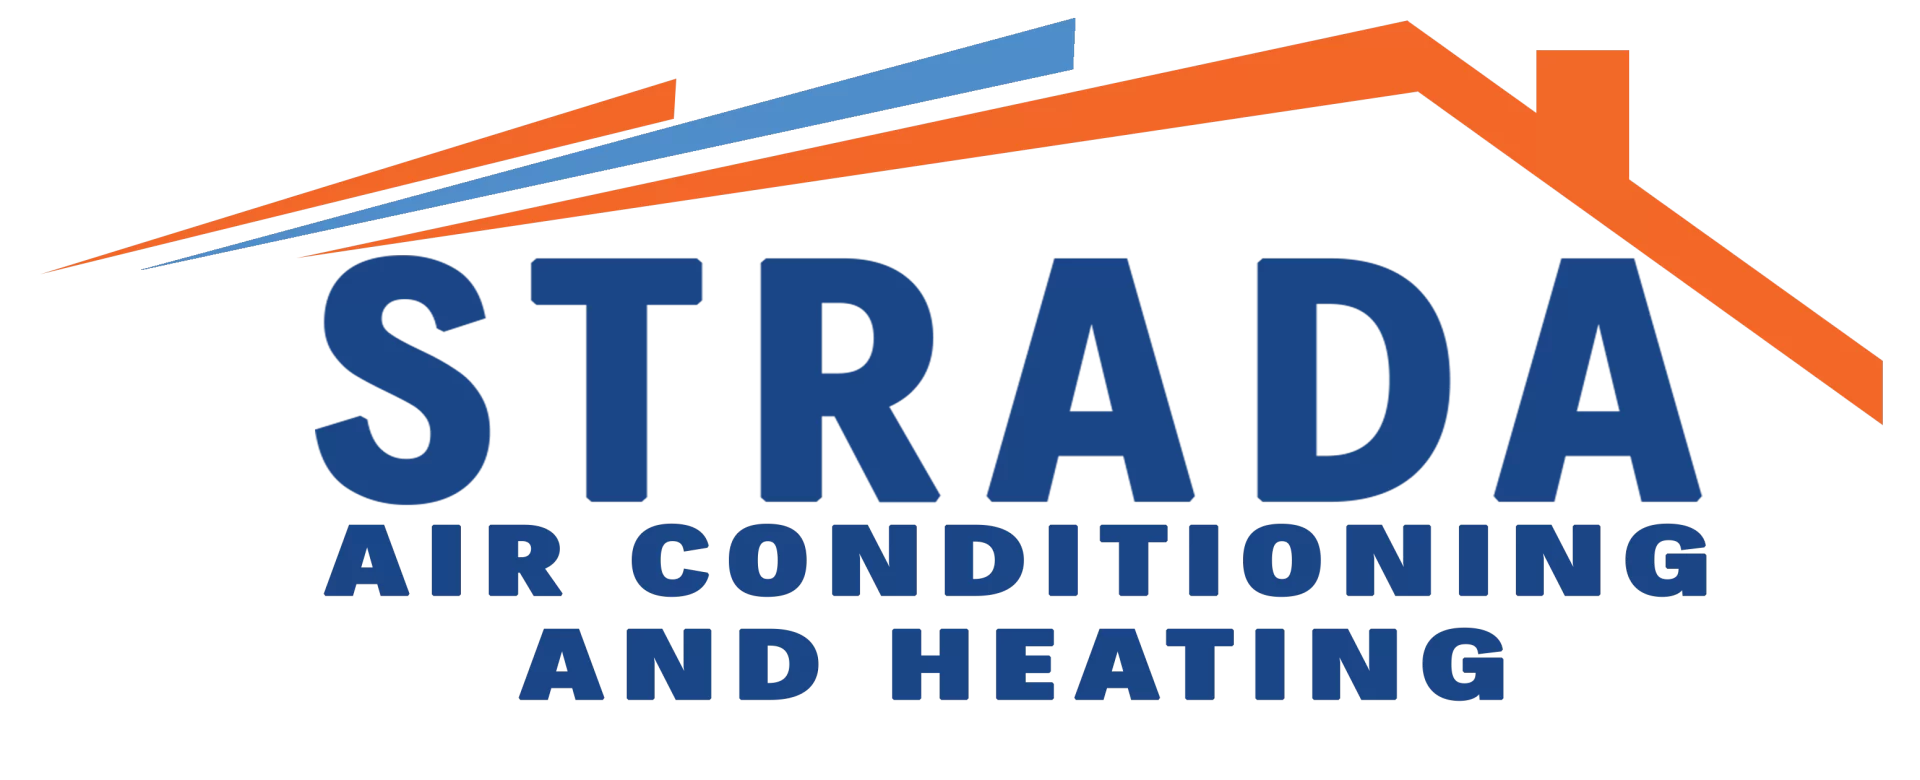 A logo that reads, "Strada Air Conditioning And Heating" with a blue and orange roof.